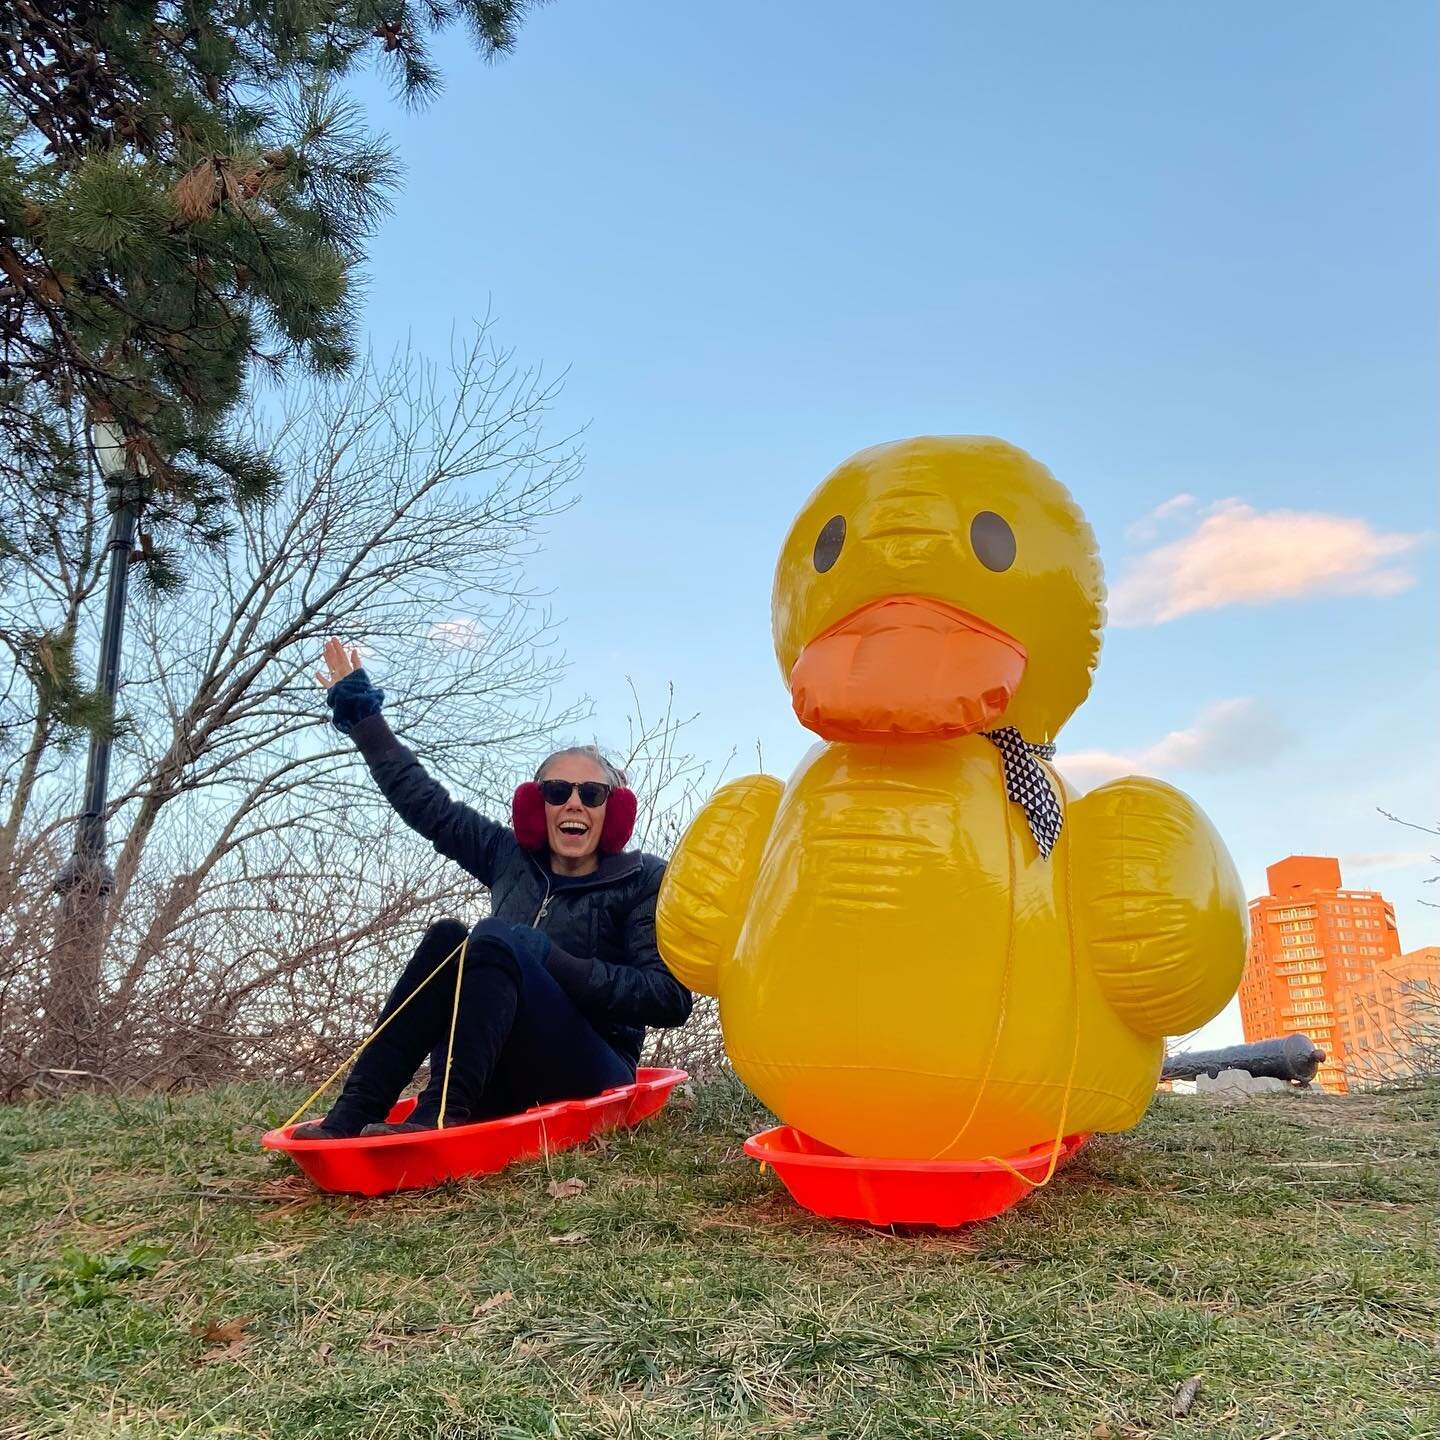 Eric's goes sledding! 
&gt;
Eric (my pet duck) decided he wants to join the Bobsled team so we headed to Central Park to test out our skills. He has some stiff competition, but with a bit more practice, I'm sure he'll make it!

He really is a duck of